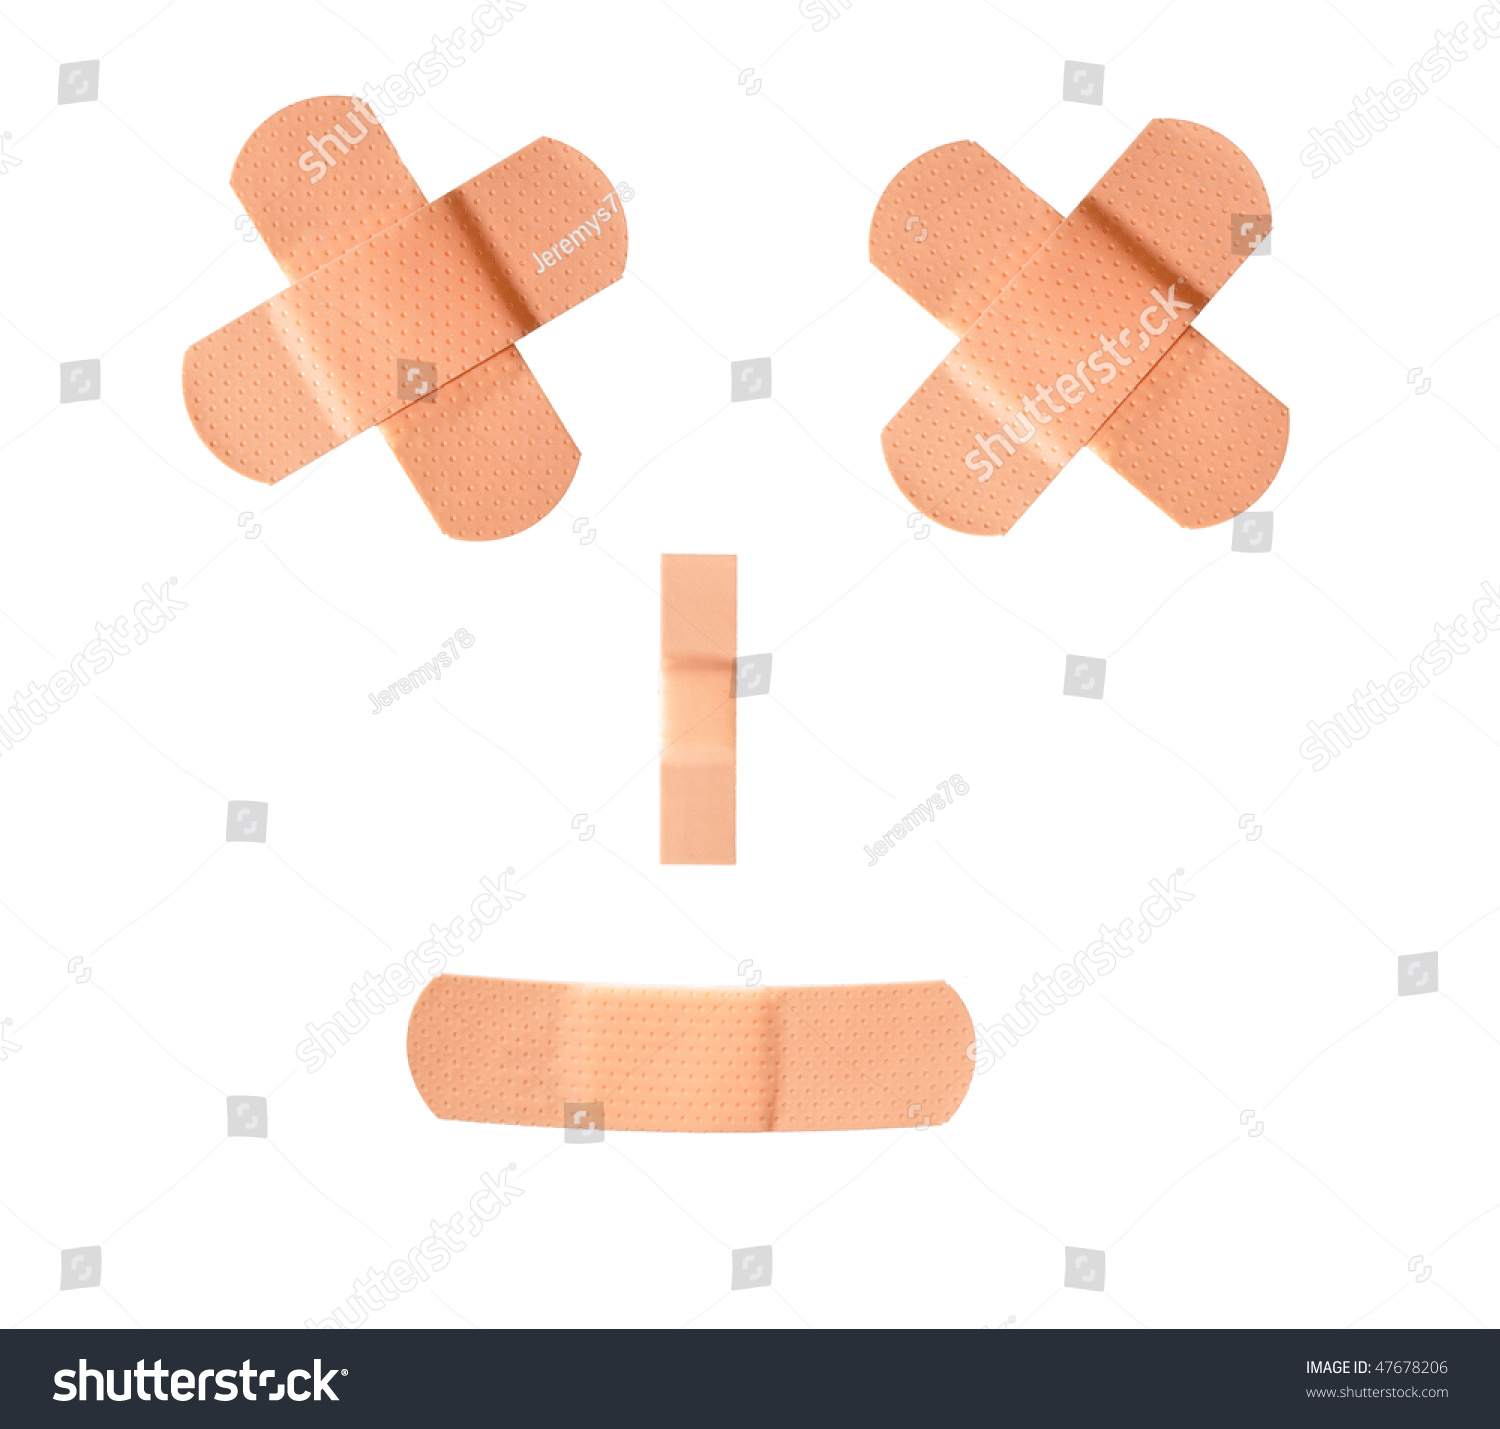 Two Adhesive Firstaid Bandages Crossed Over Stock Photo (100% Legal ...